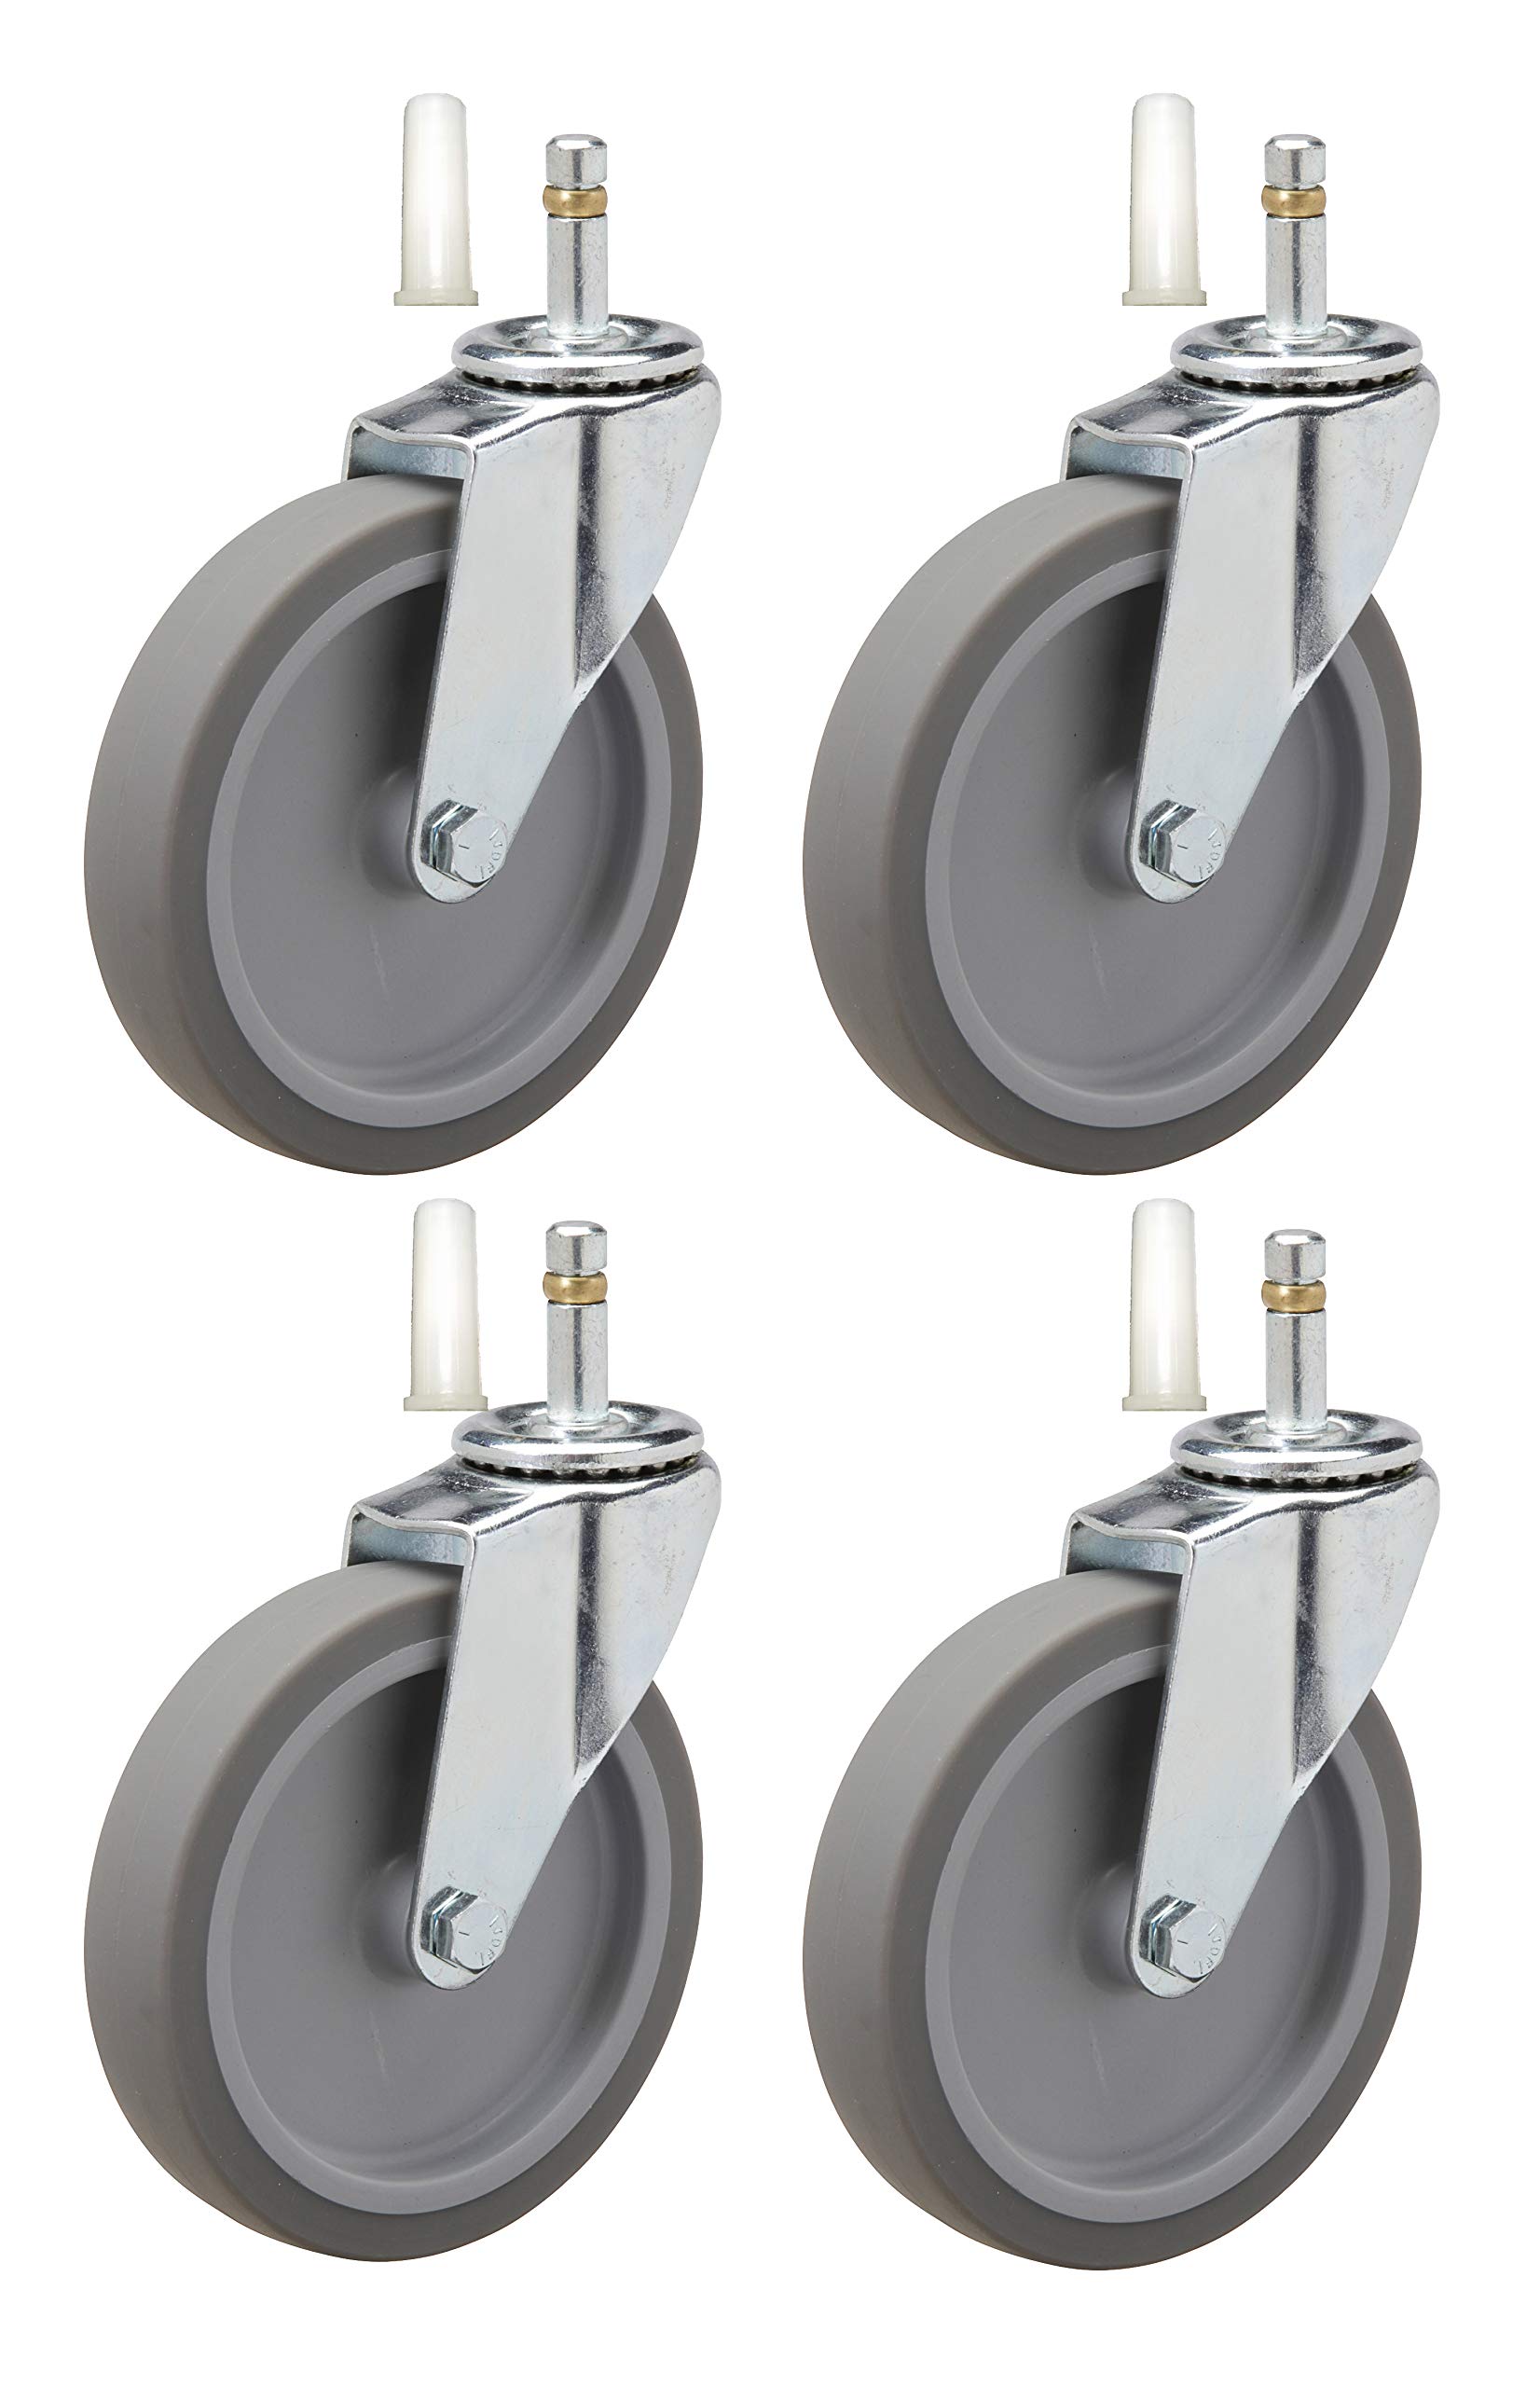 4" Caster Replacement for Rubbermaid Utility Carts | Set of 4 | Fits Series 4000, 3355-88, 3424-88